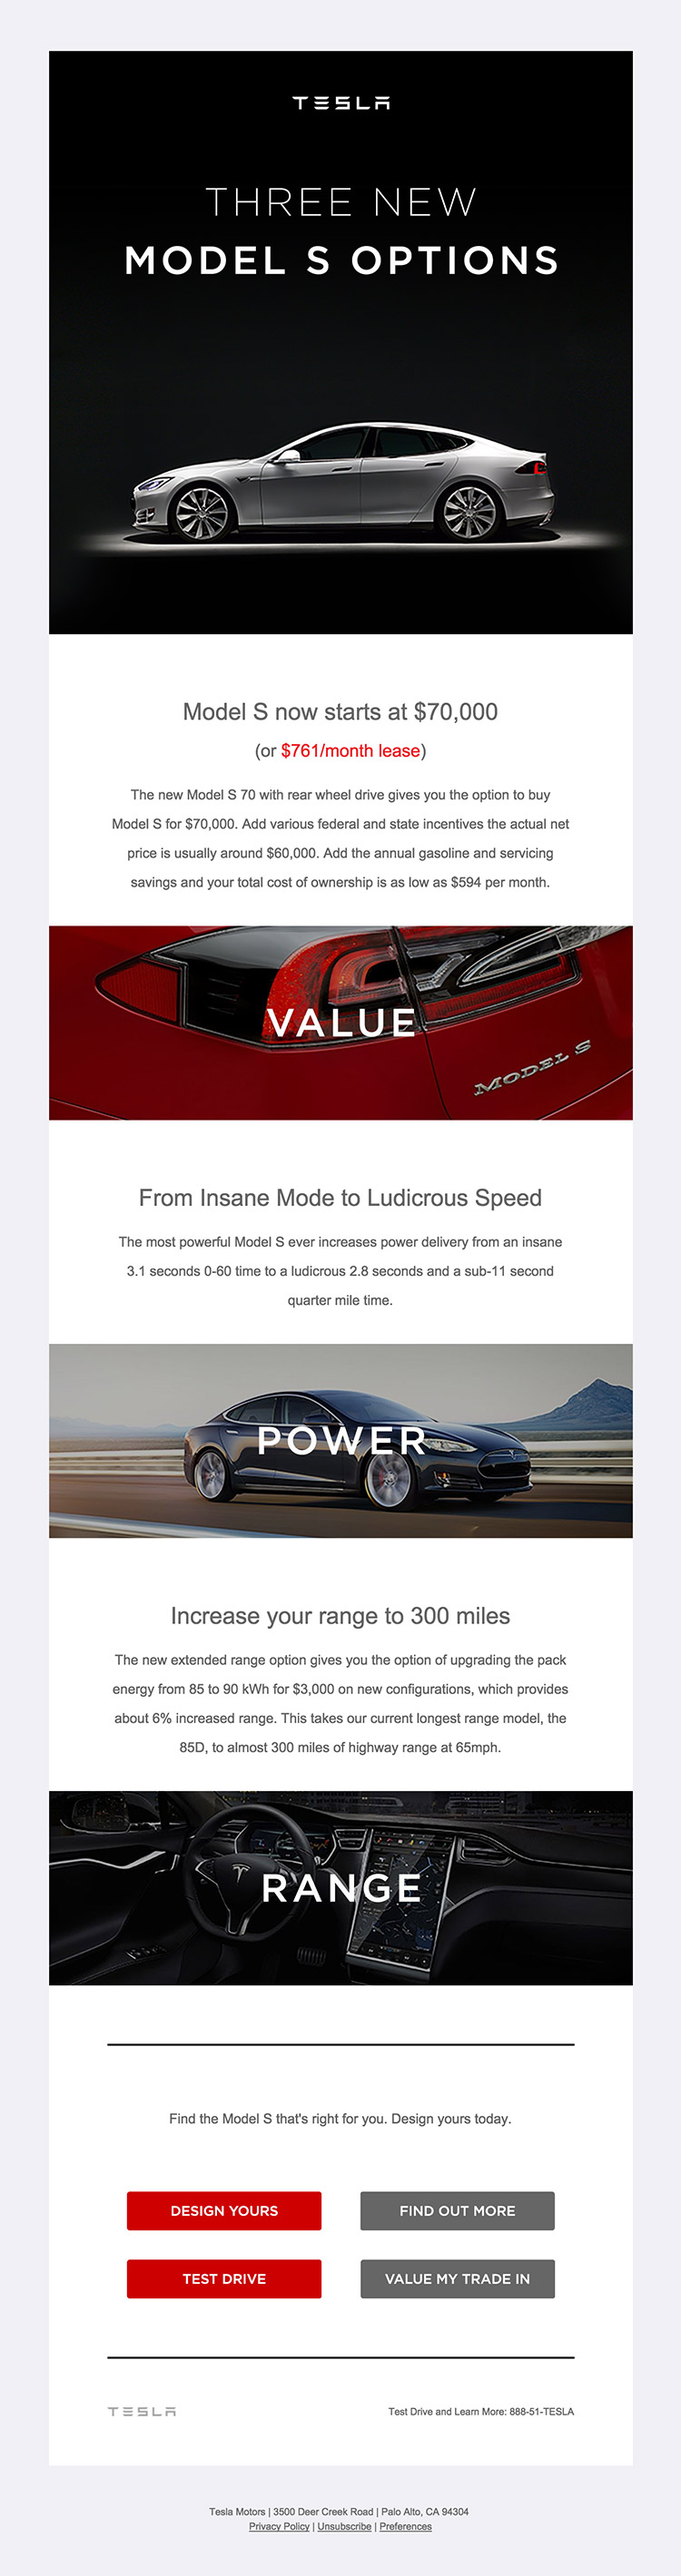 Tesla Model S Choices email design